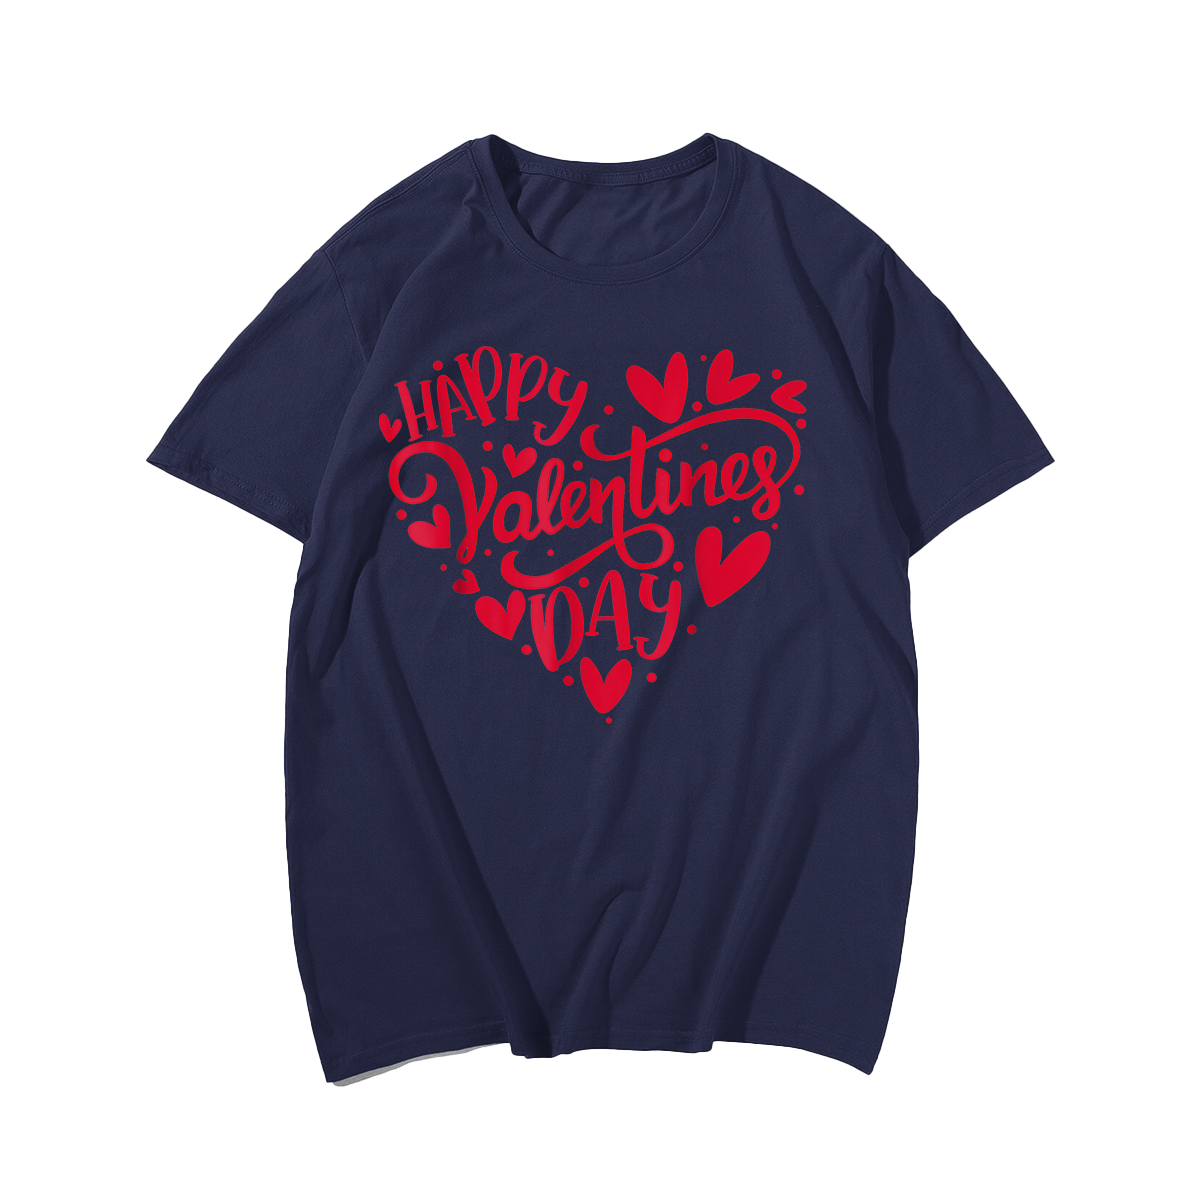 Happy Valentines Day Valentine Heart T-Shirt, Men Plus Size Oversize T-shirt for Big & Tall Man